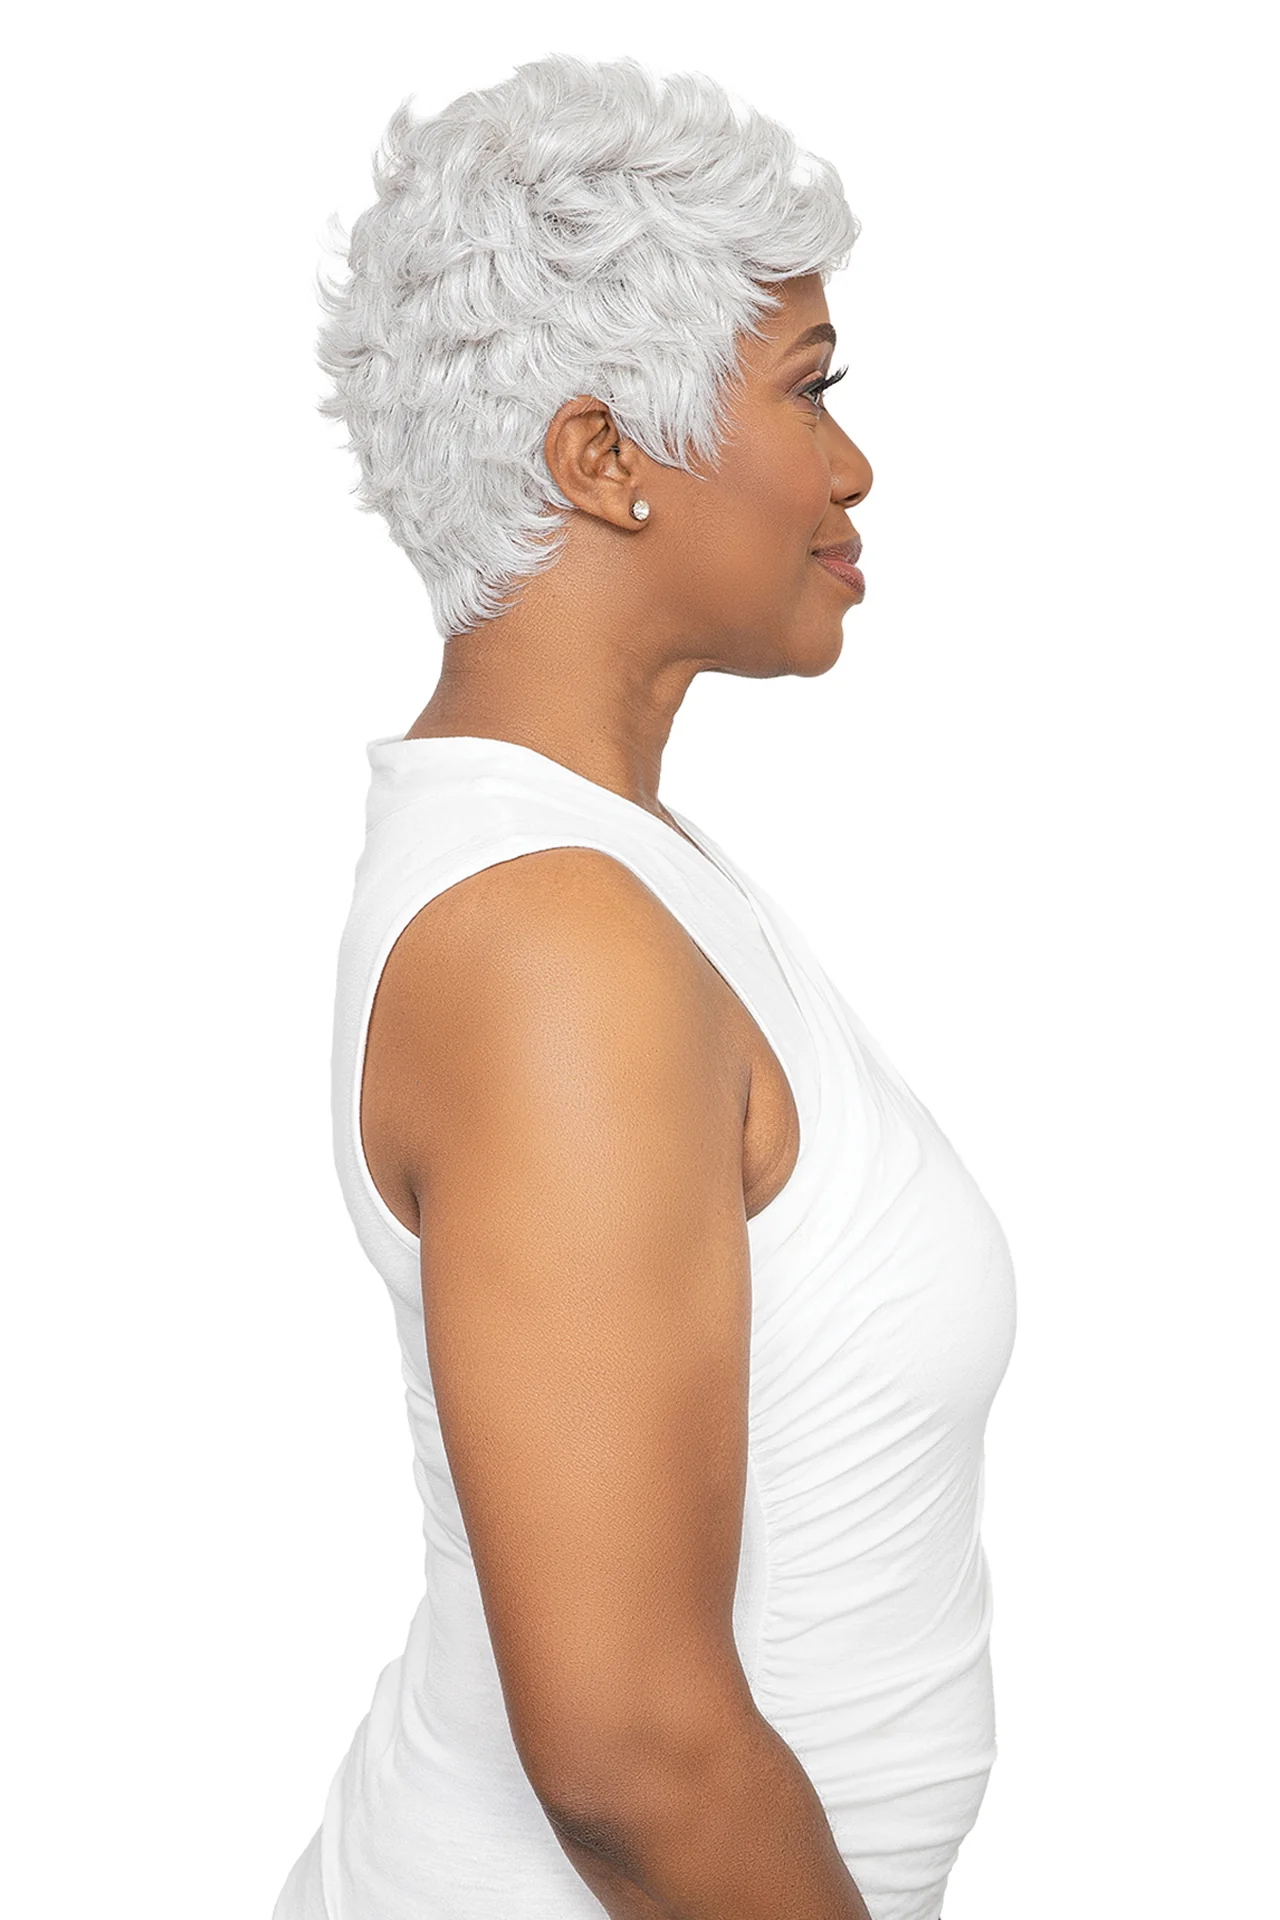 Femi Collection Ms. Auntie Synthetic Wig Echo